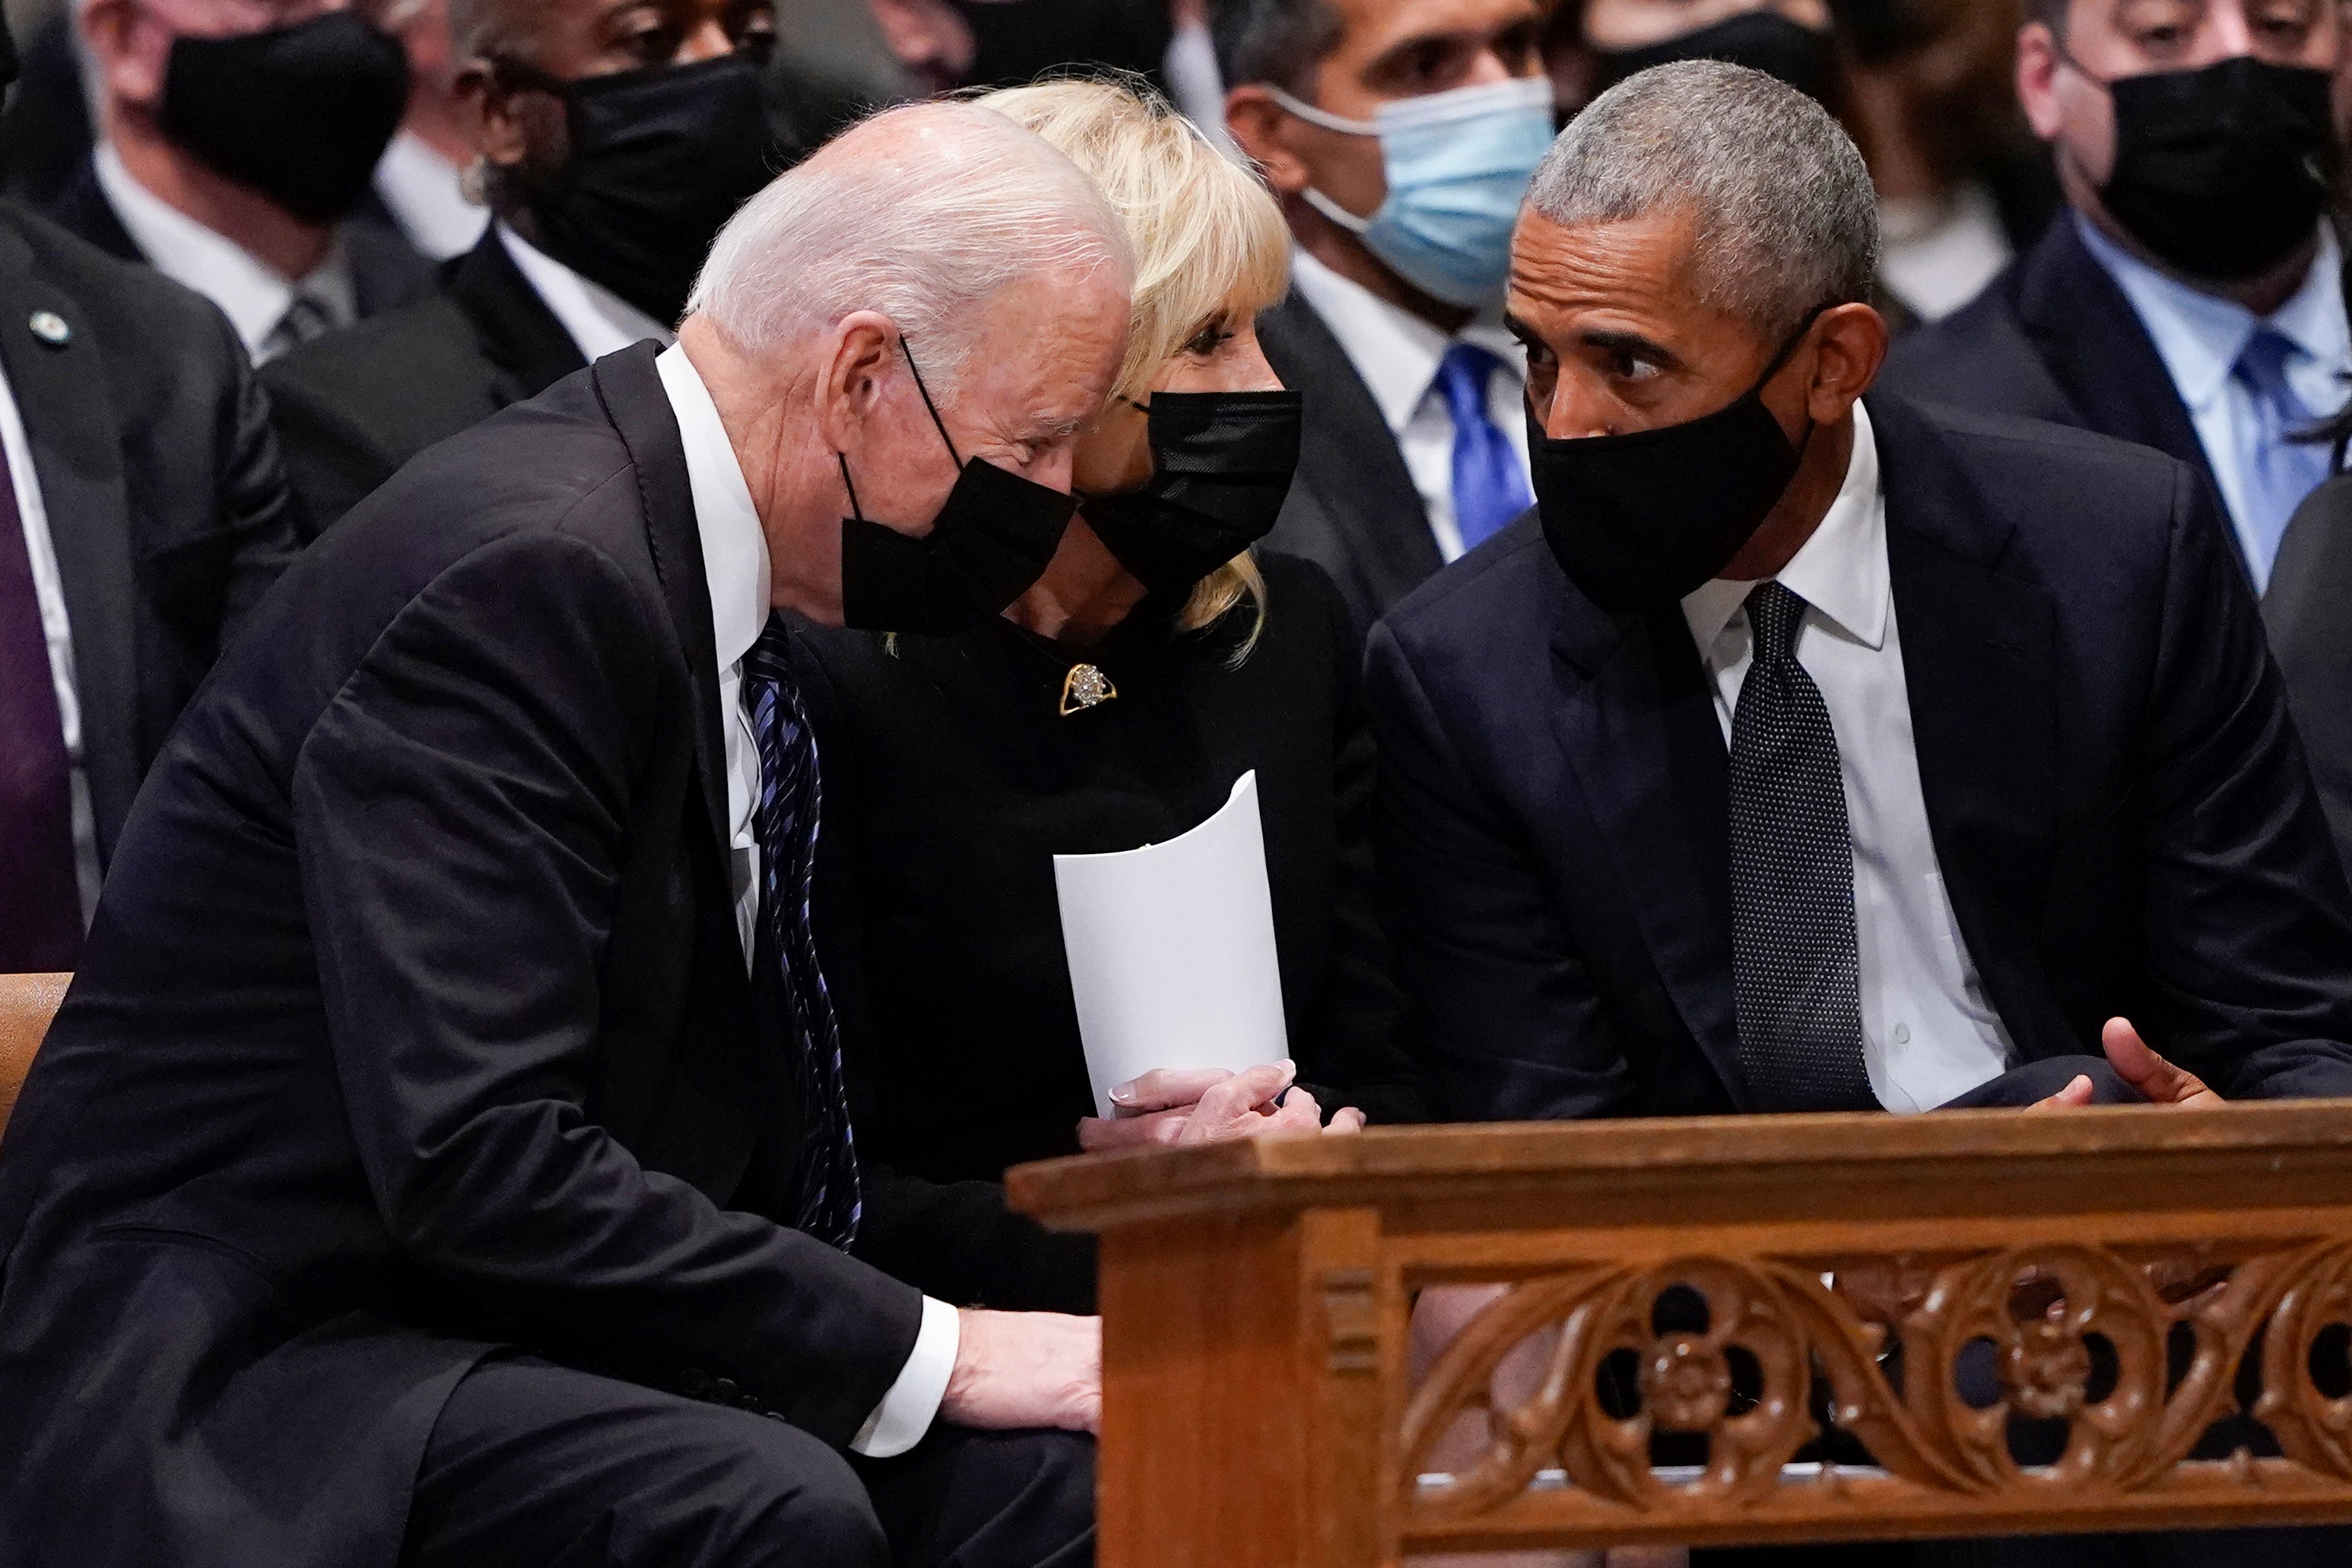 President Joe Biden and first lady Jill Biden talk with former President Barack Obama before the funeral for former Secretary of State Colin Powell at the Washington National Cathedral on 5 November, 2021.